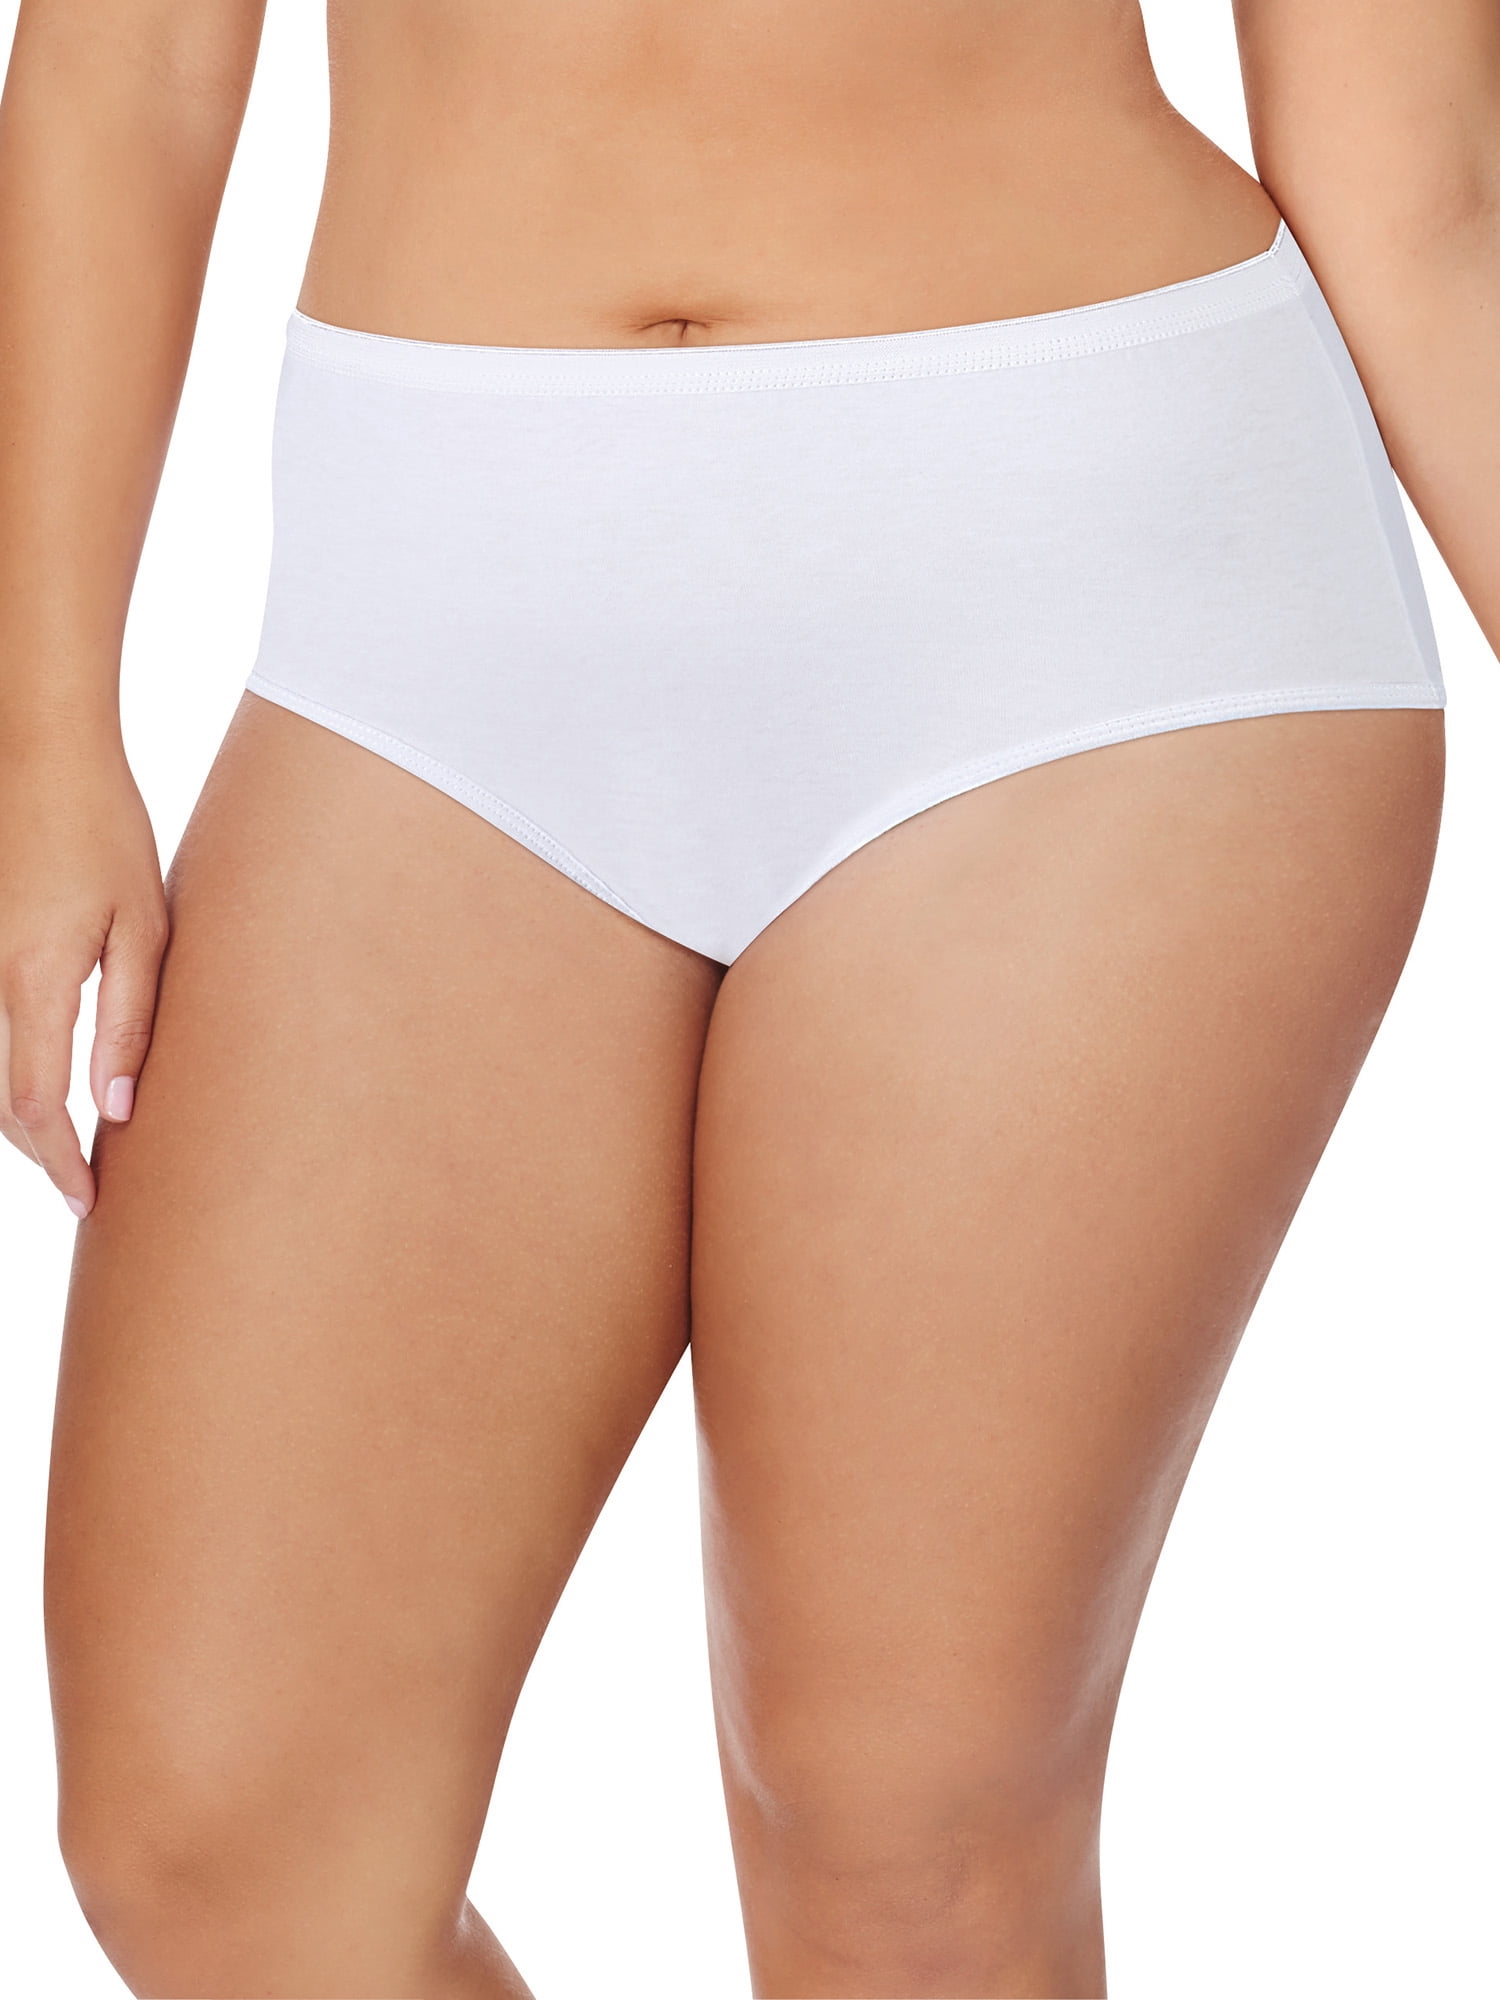 Hanes byHanes Womens Cotton Brief 10-Pack (White, Size 11) at  Women's  Clothing store